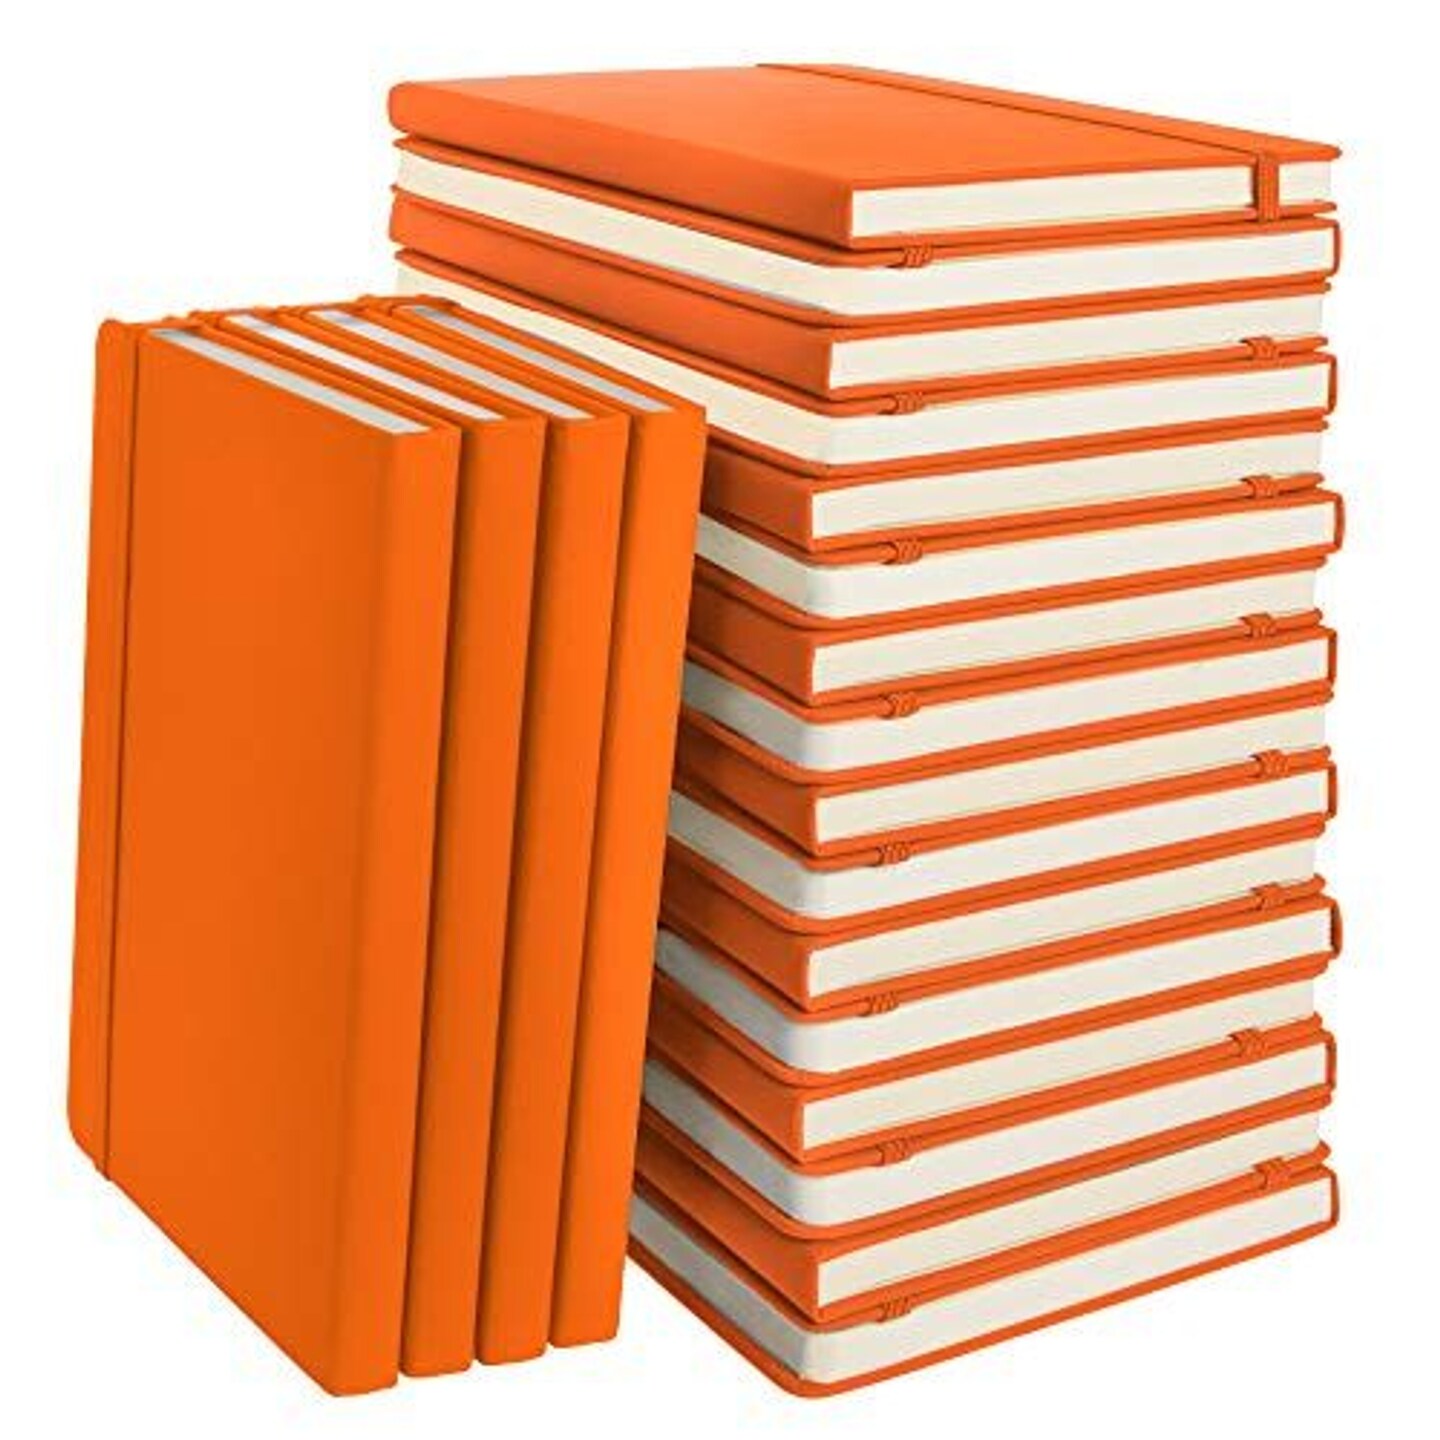 Simply Genius A5 Dotted Notebooks for Work, Travel, Business, School &#x26; More - Hardcover Journals for Writing - Grid Notebook for Men &#x26; Women - 192 pages, 5.7&#x22; x 8.4&#x22; (Orange, 20 Pack)